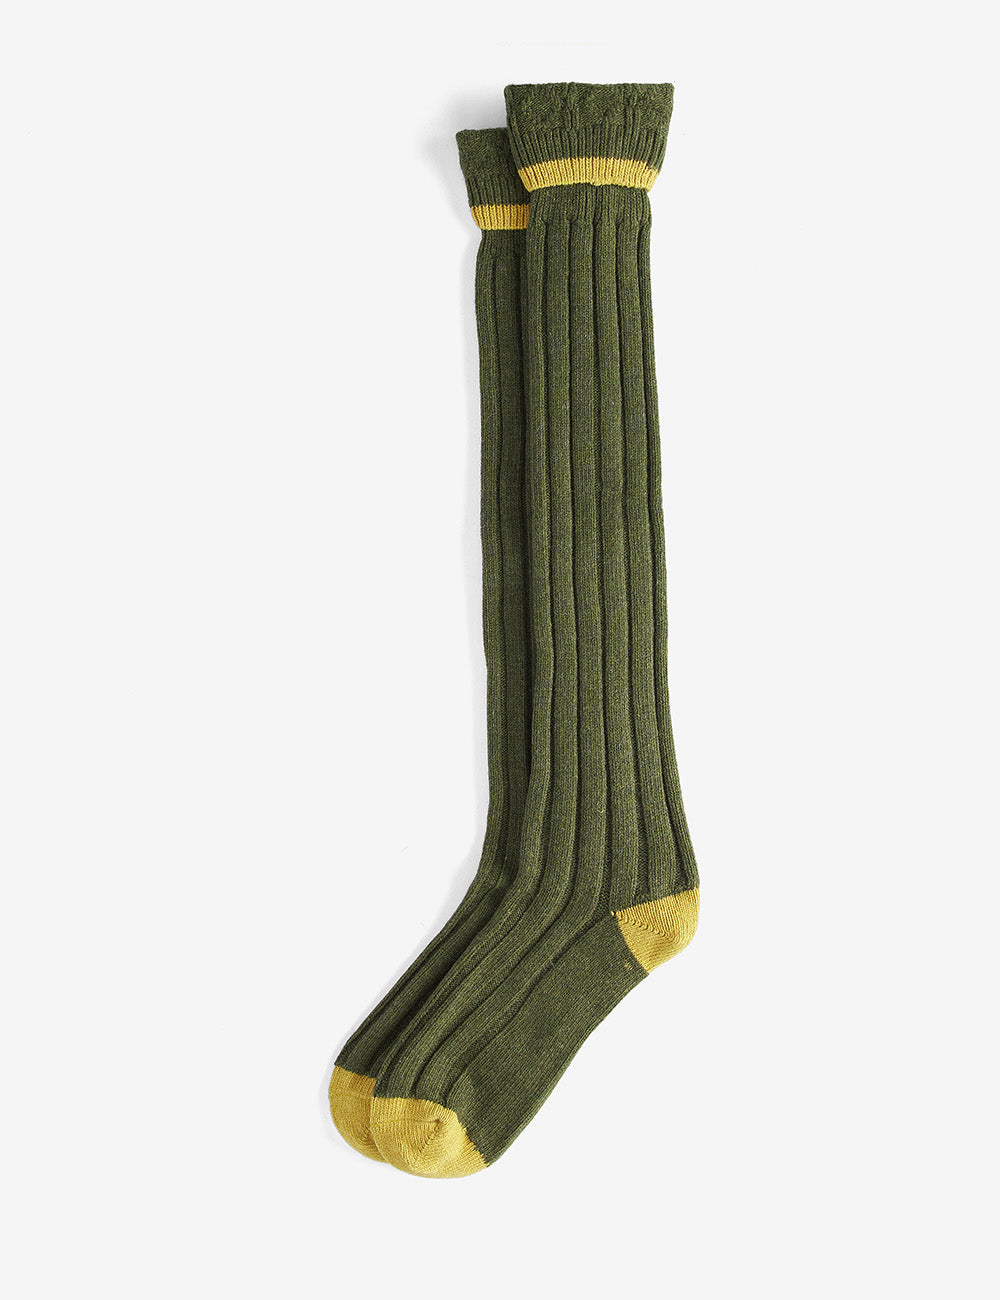 Barbour Contrast Gun Stockings - Olive/Gold